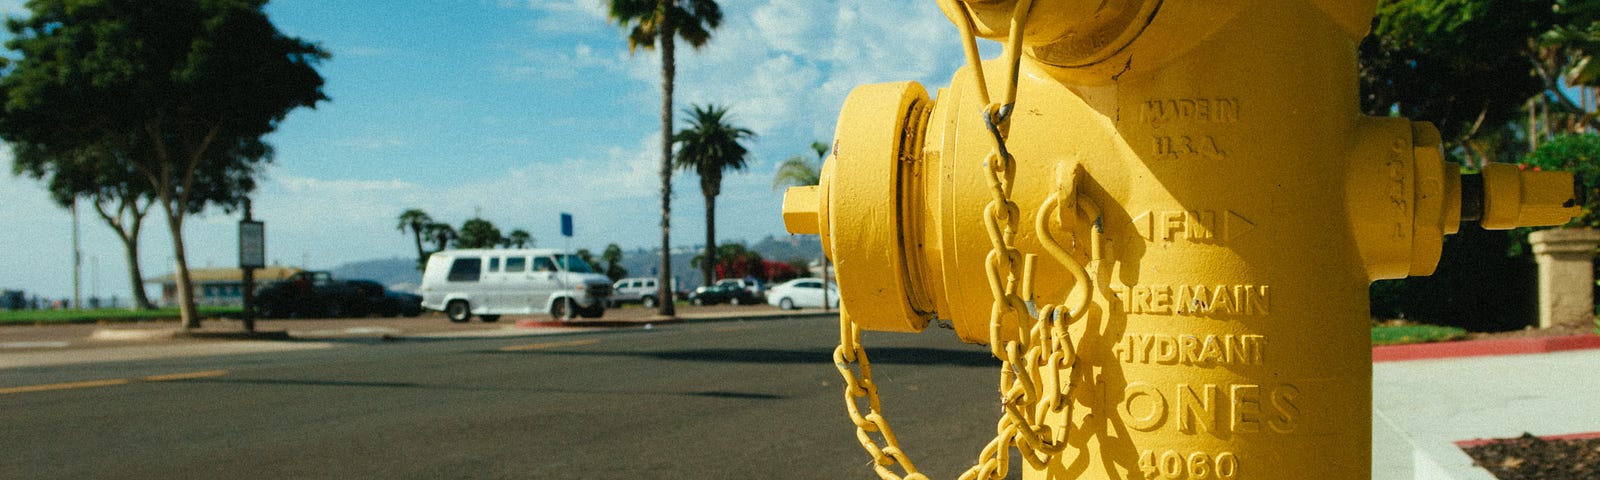 To Succeed in Hollywood, Screenwriters Need to Understand the Hydrant Effect